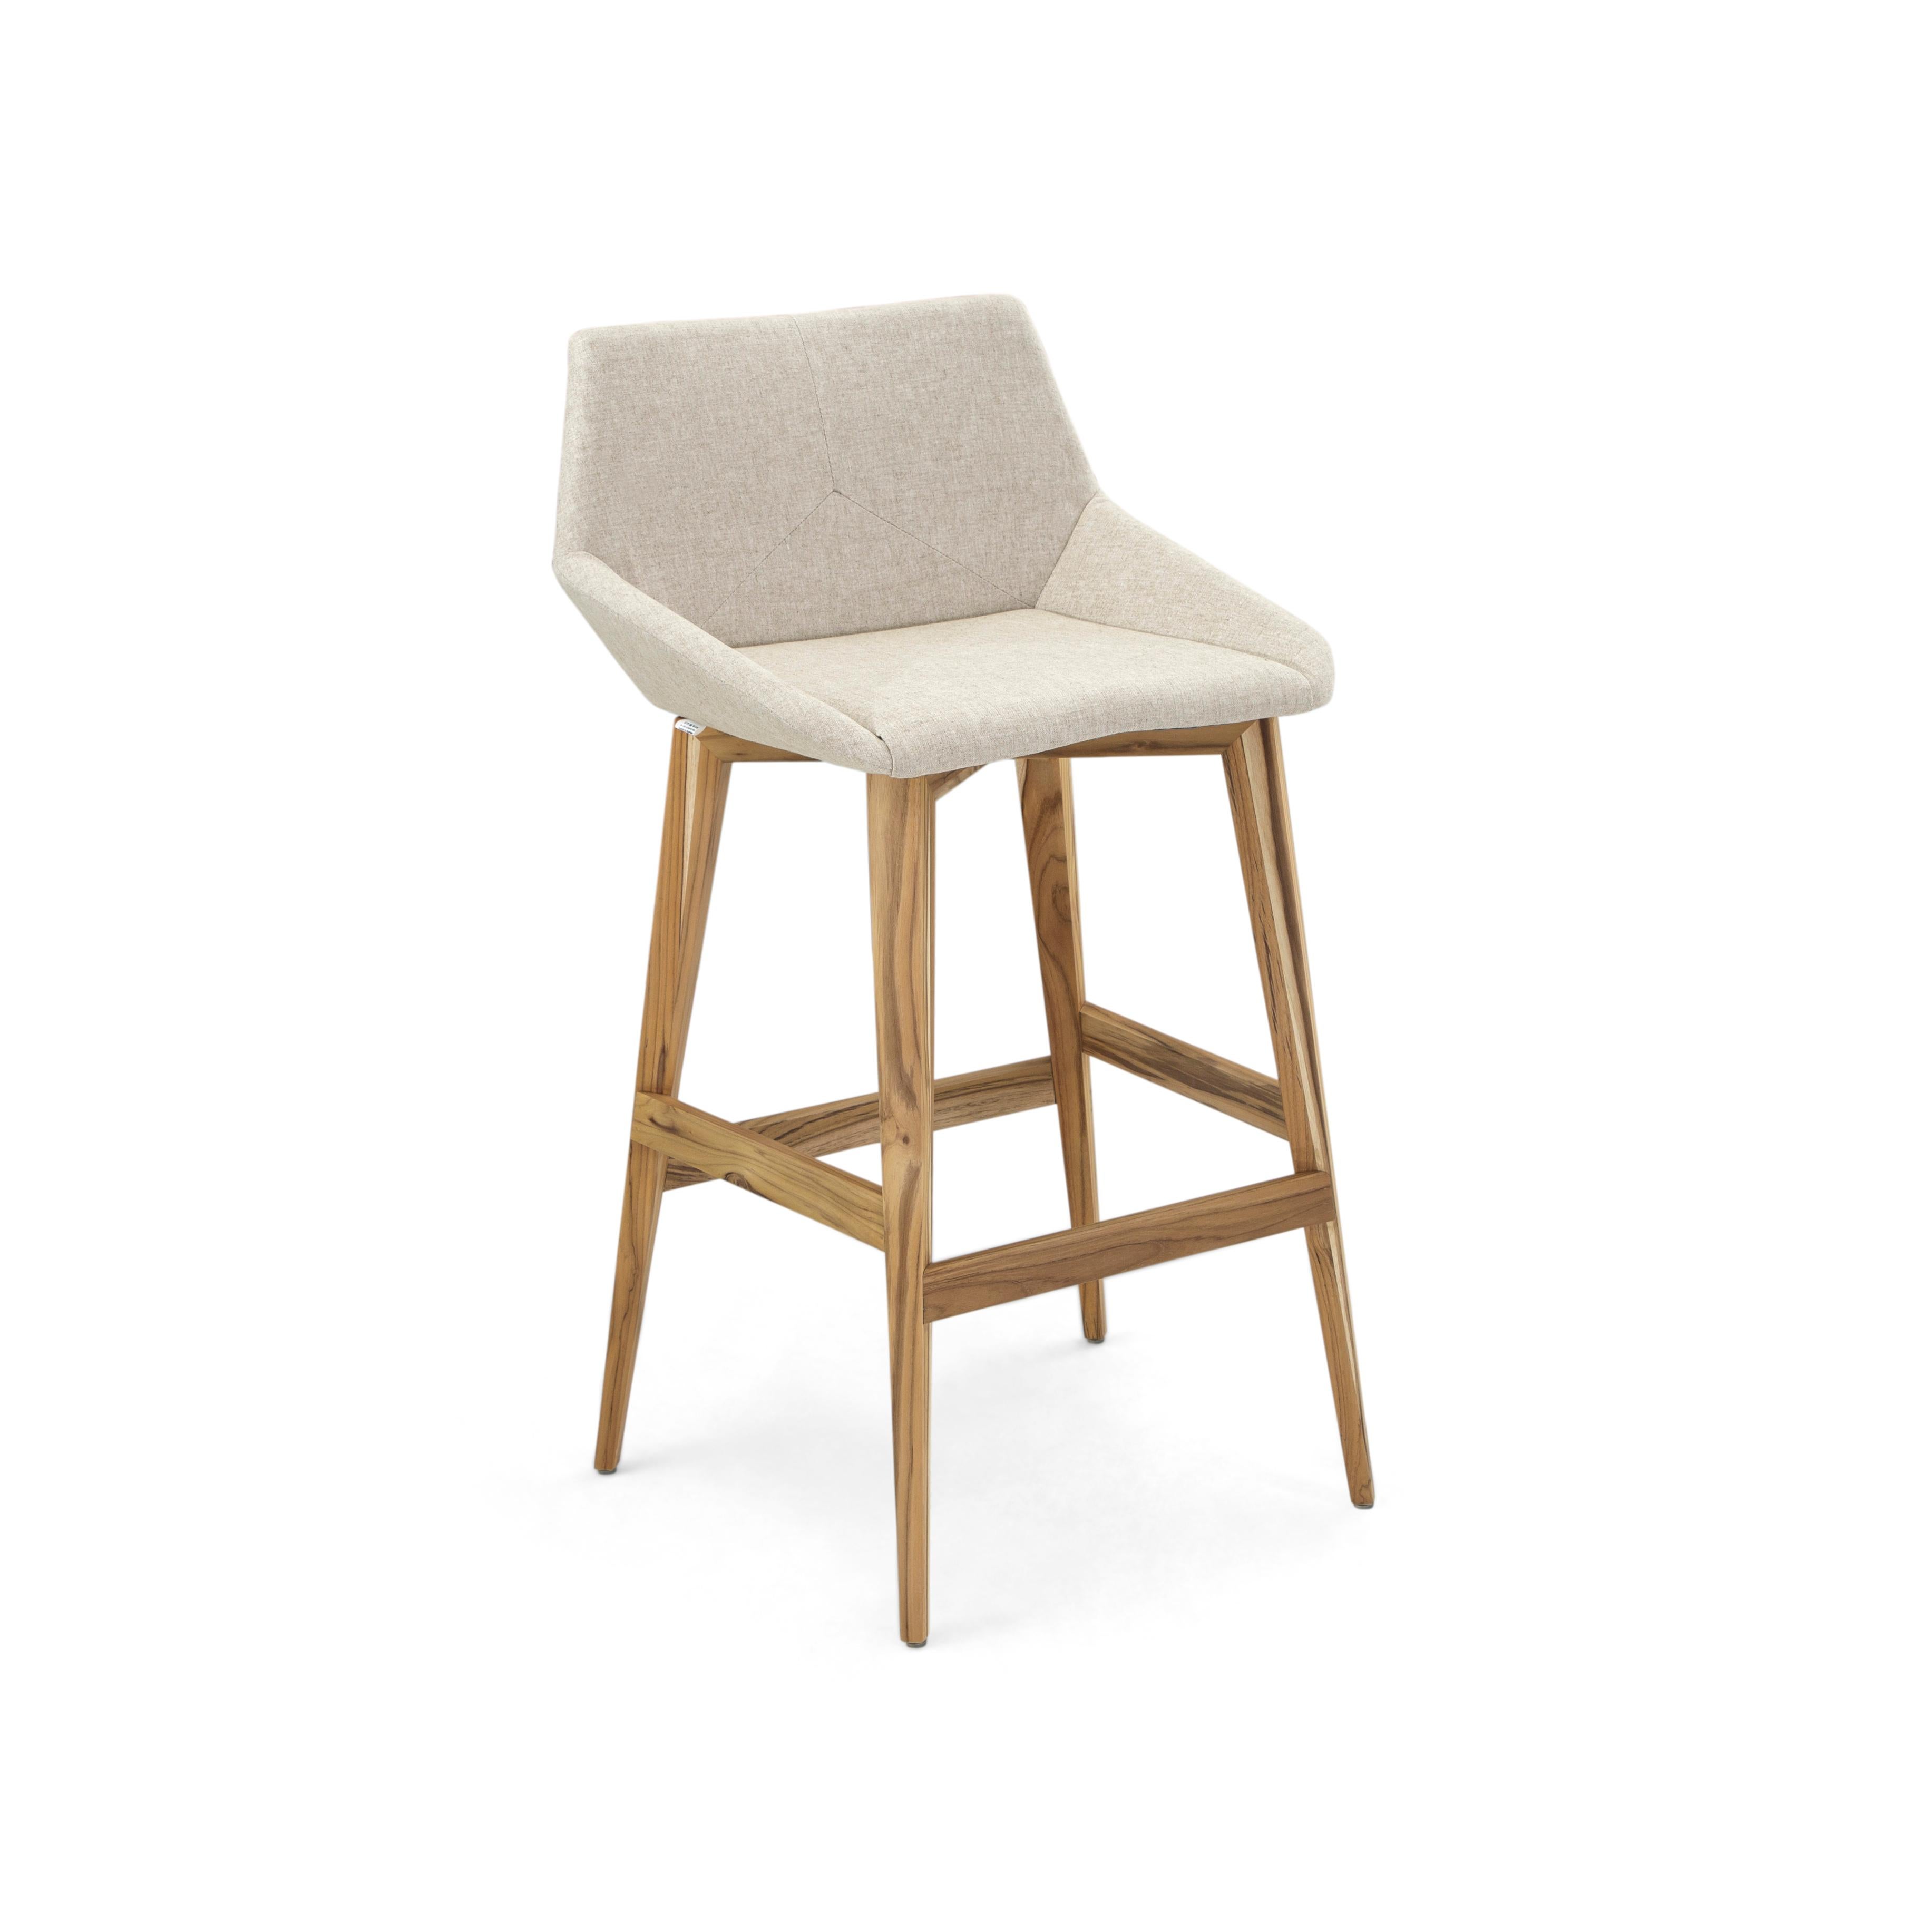 Contemporary Geometric Cubi Bar Stool with Teak Wood Finish Base and Oatmeal Fabric Seat For Sale